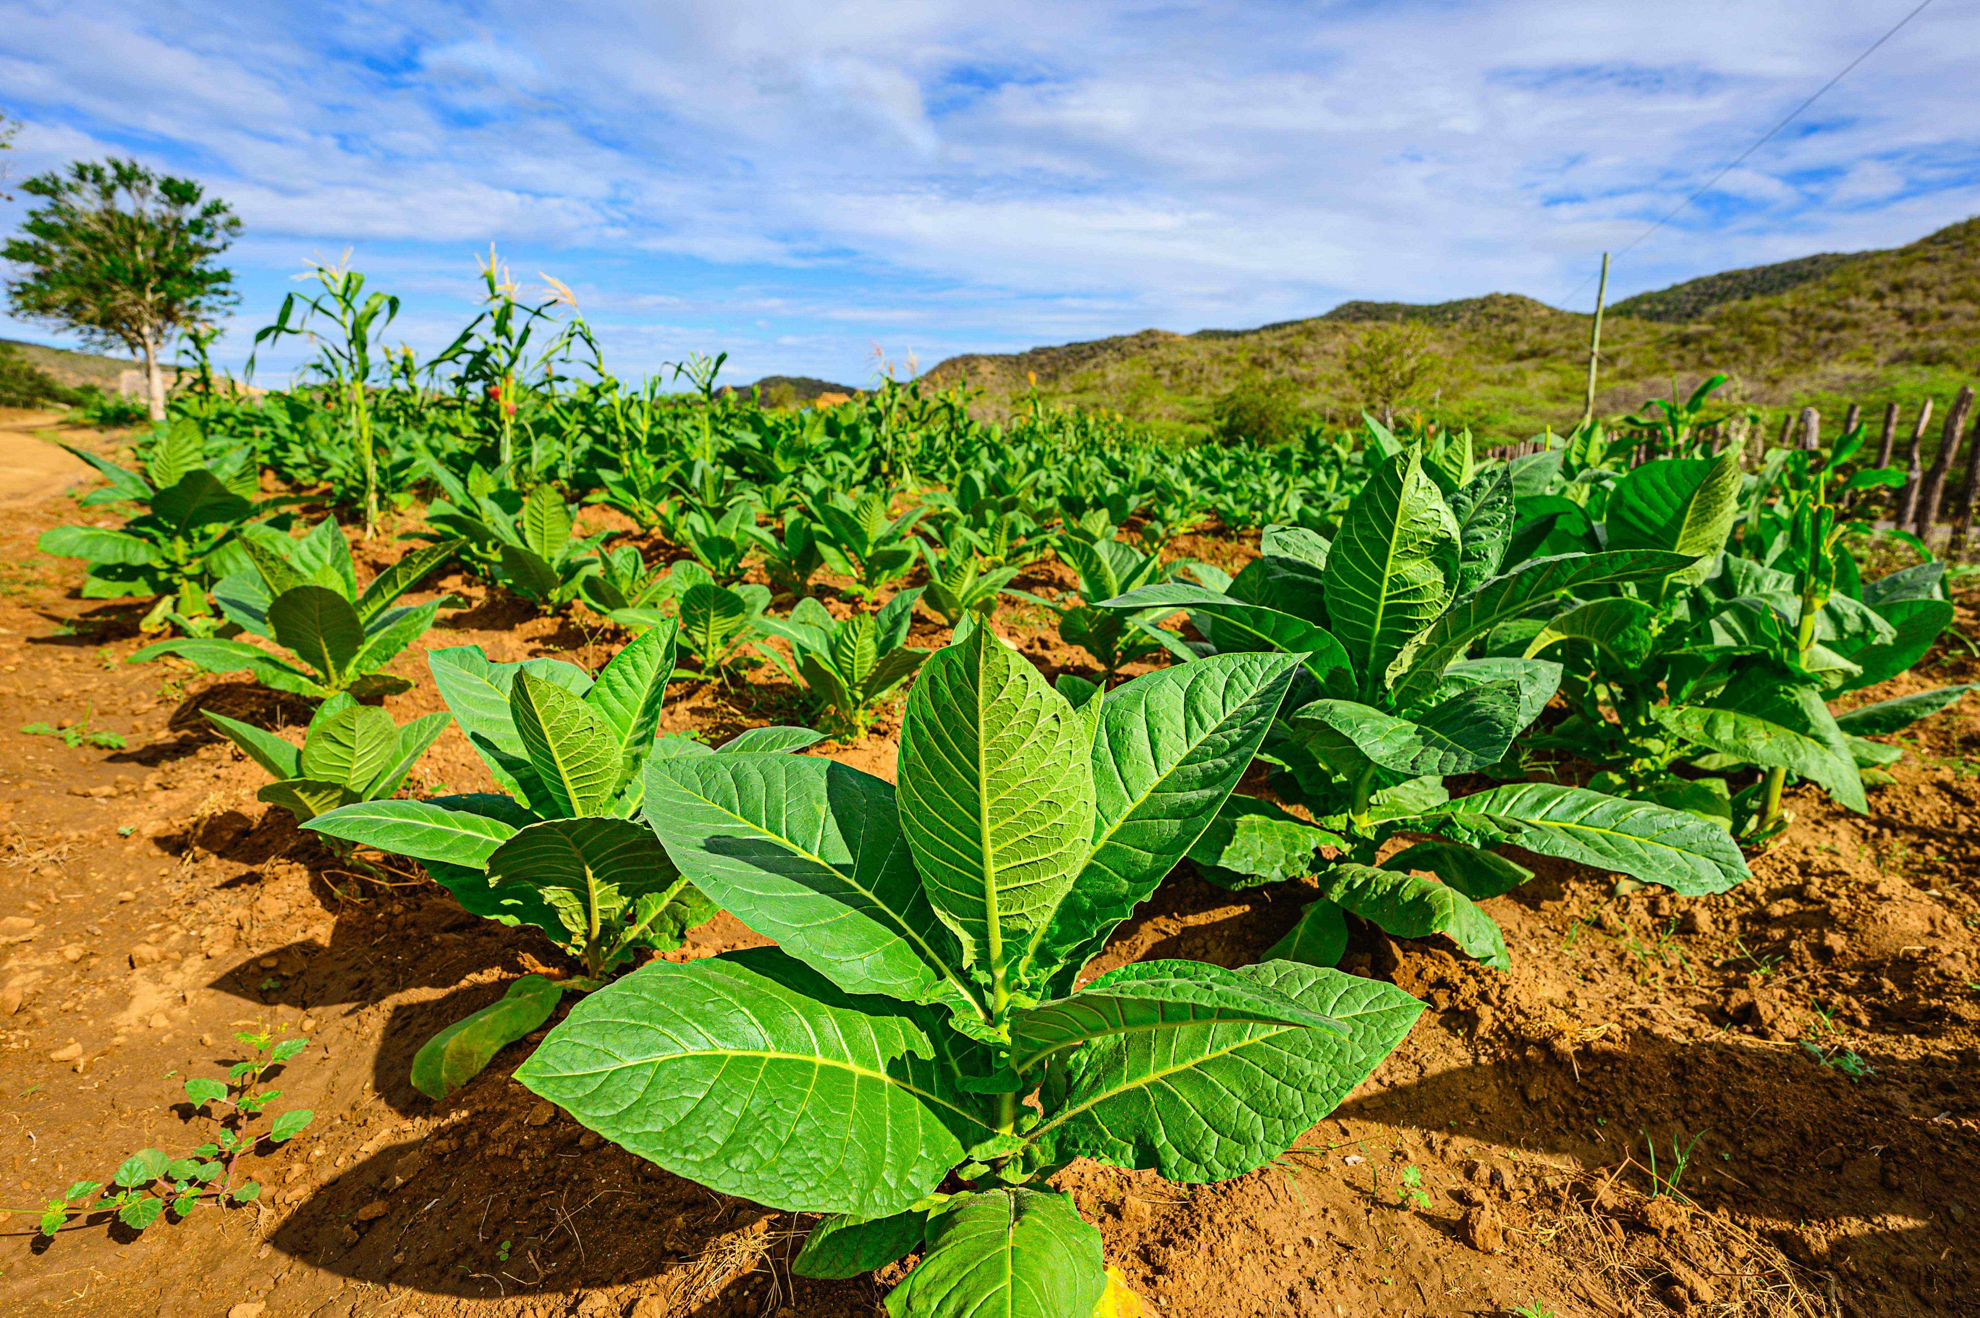 Dominican Republic cigars: A close up of the tobacco plant growing in the plantation